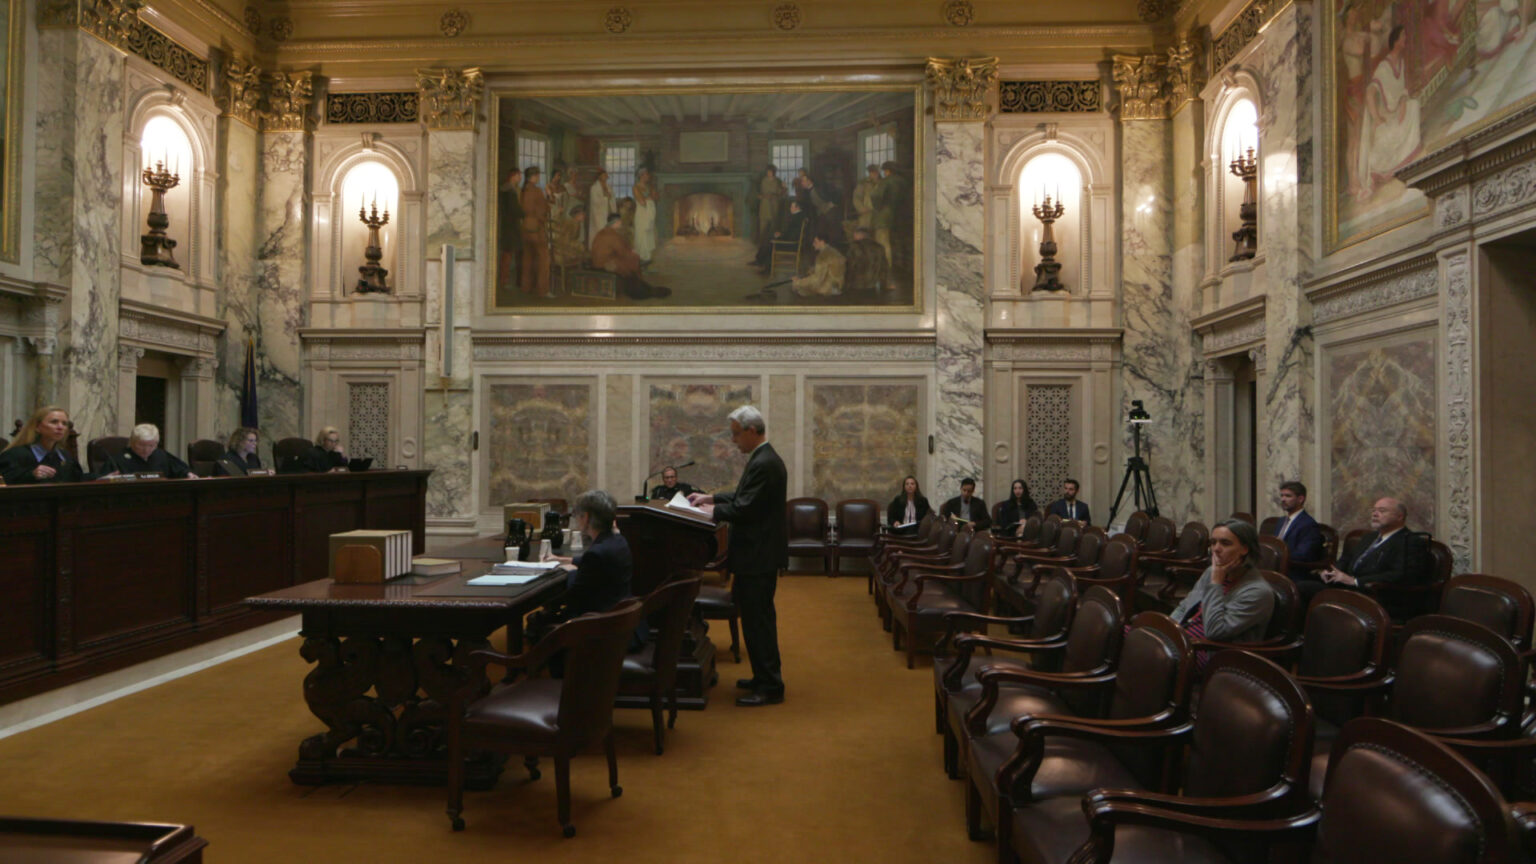 A man stands behind a podium and looks at papers while facing a judicial bench with multiple seated justices, with other people seated at tables on either side of the podium and in rows of leather-and-wood chairs facing the dais and on a side wall, in an ornate room with marble masonry, electrified lighting in wall niches, crown moulding and paintings.